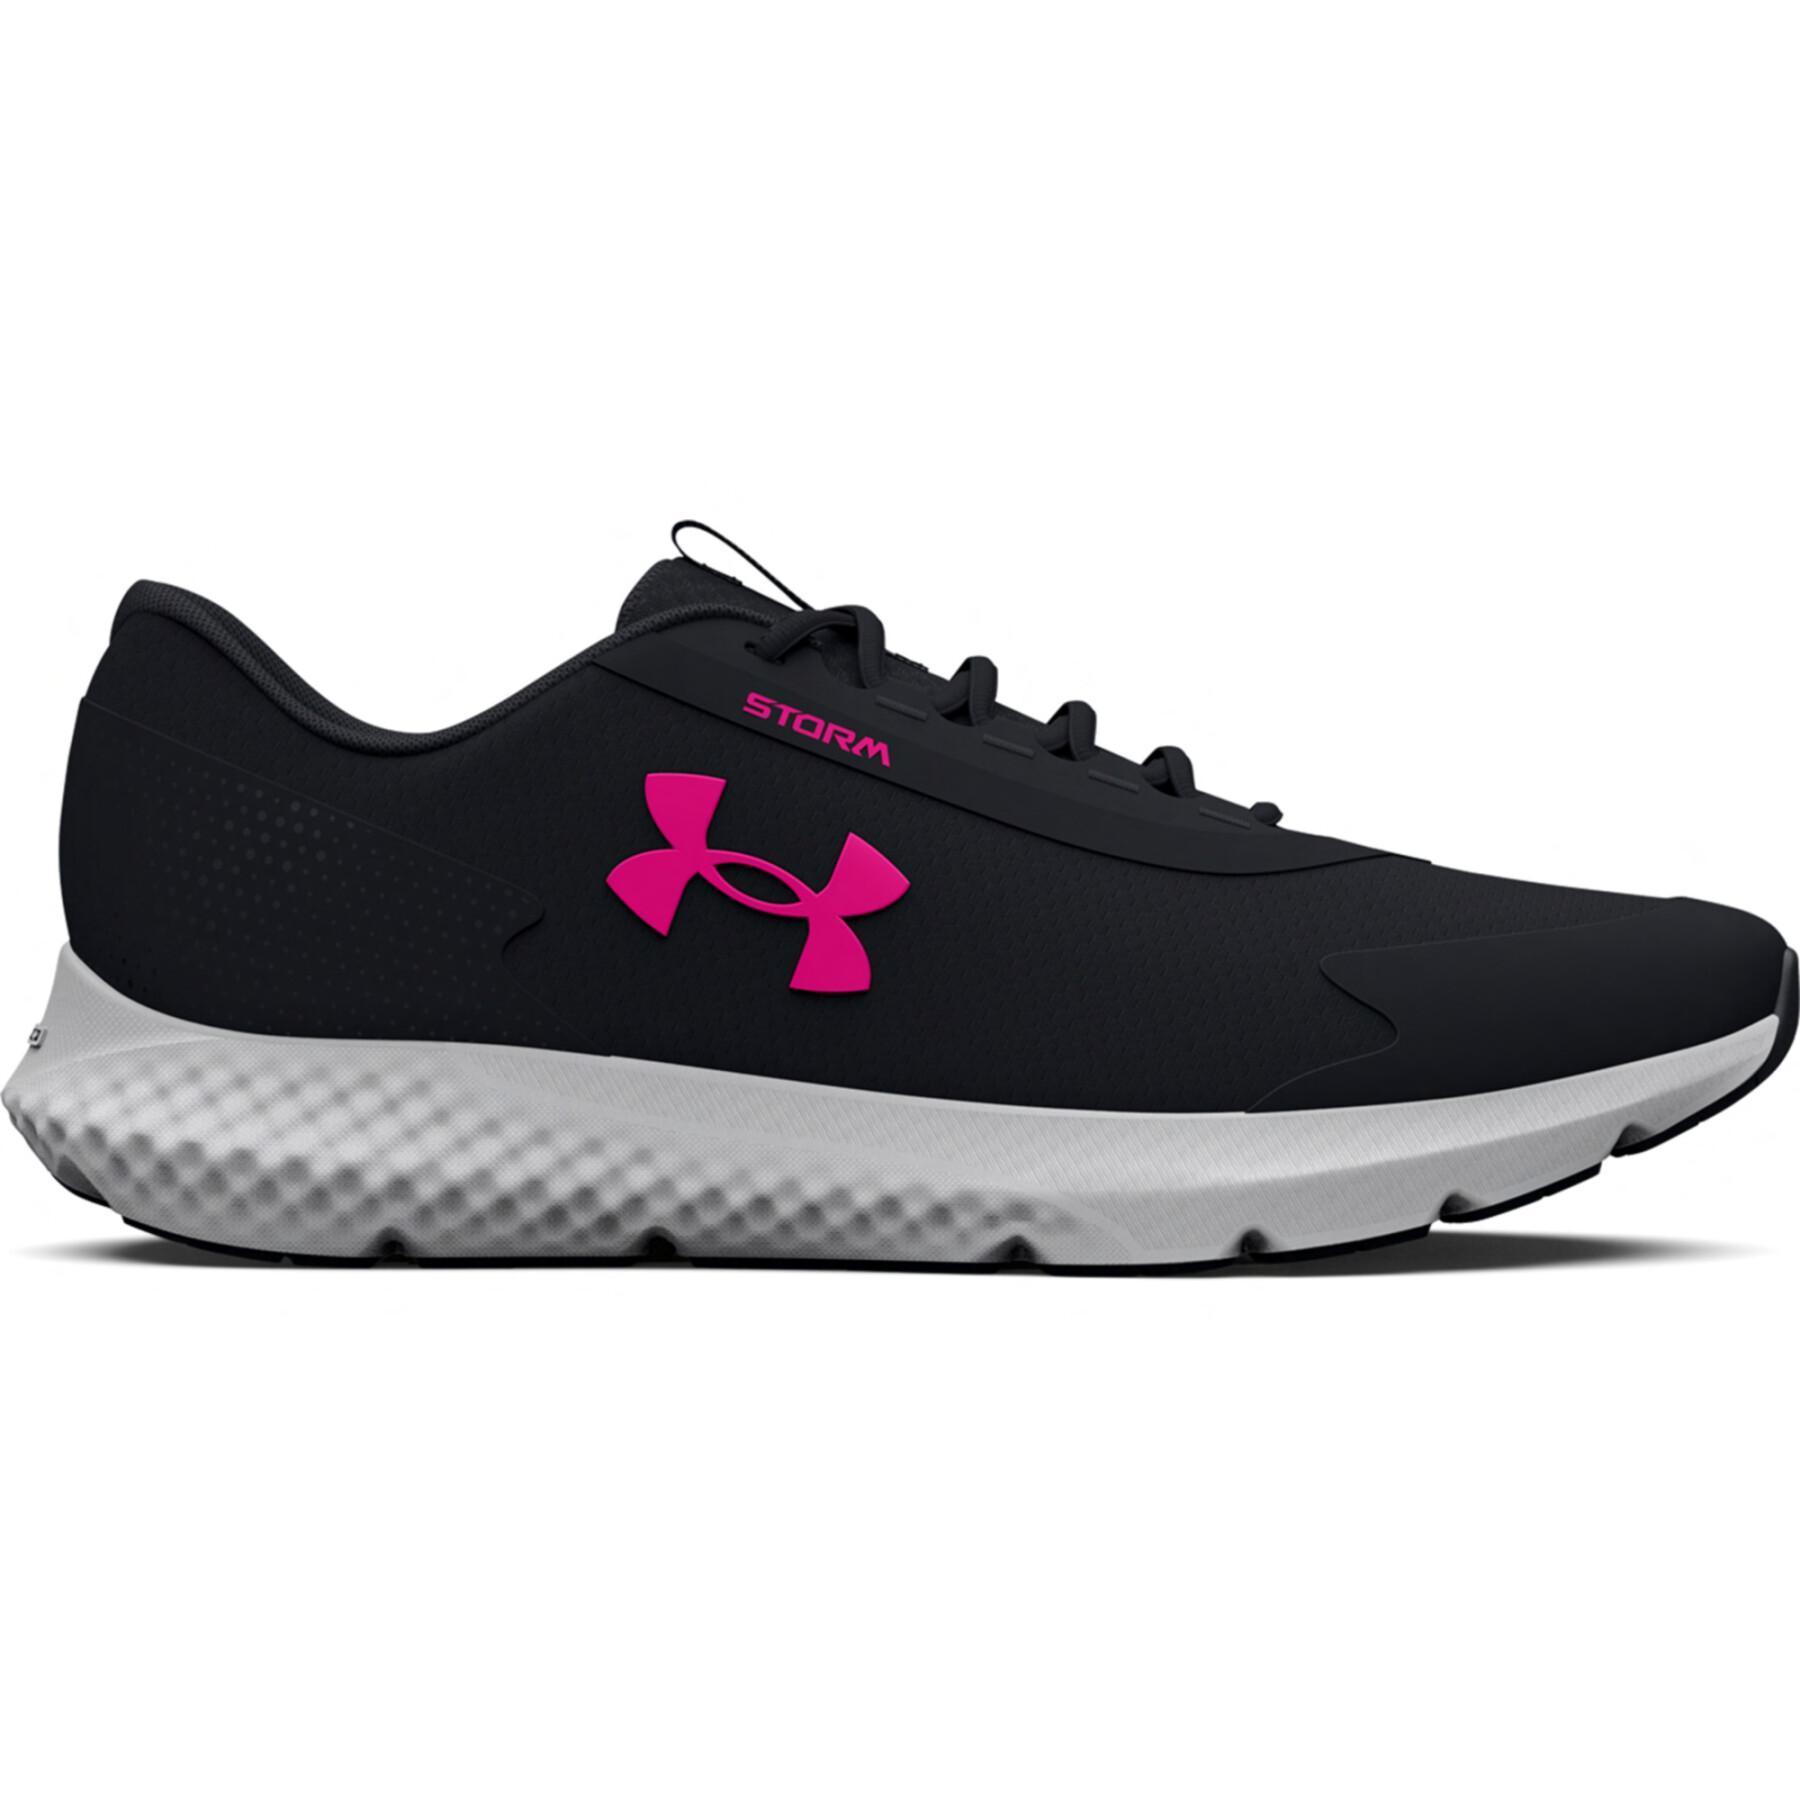 Sapatos de mulher running femme Under Armour Charged Rogue 3 Storm